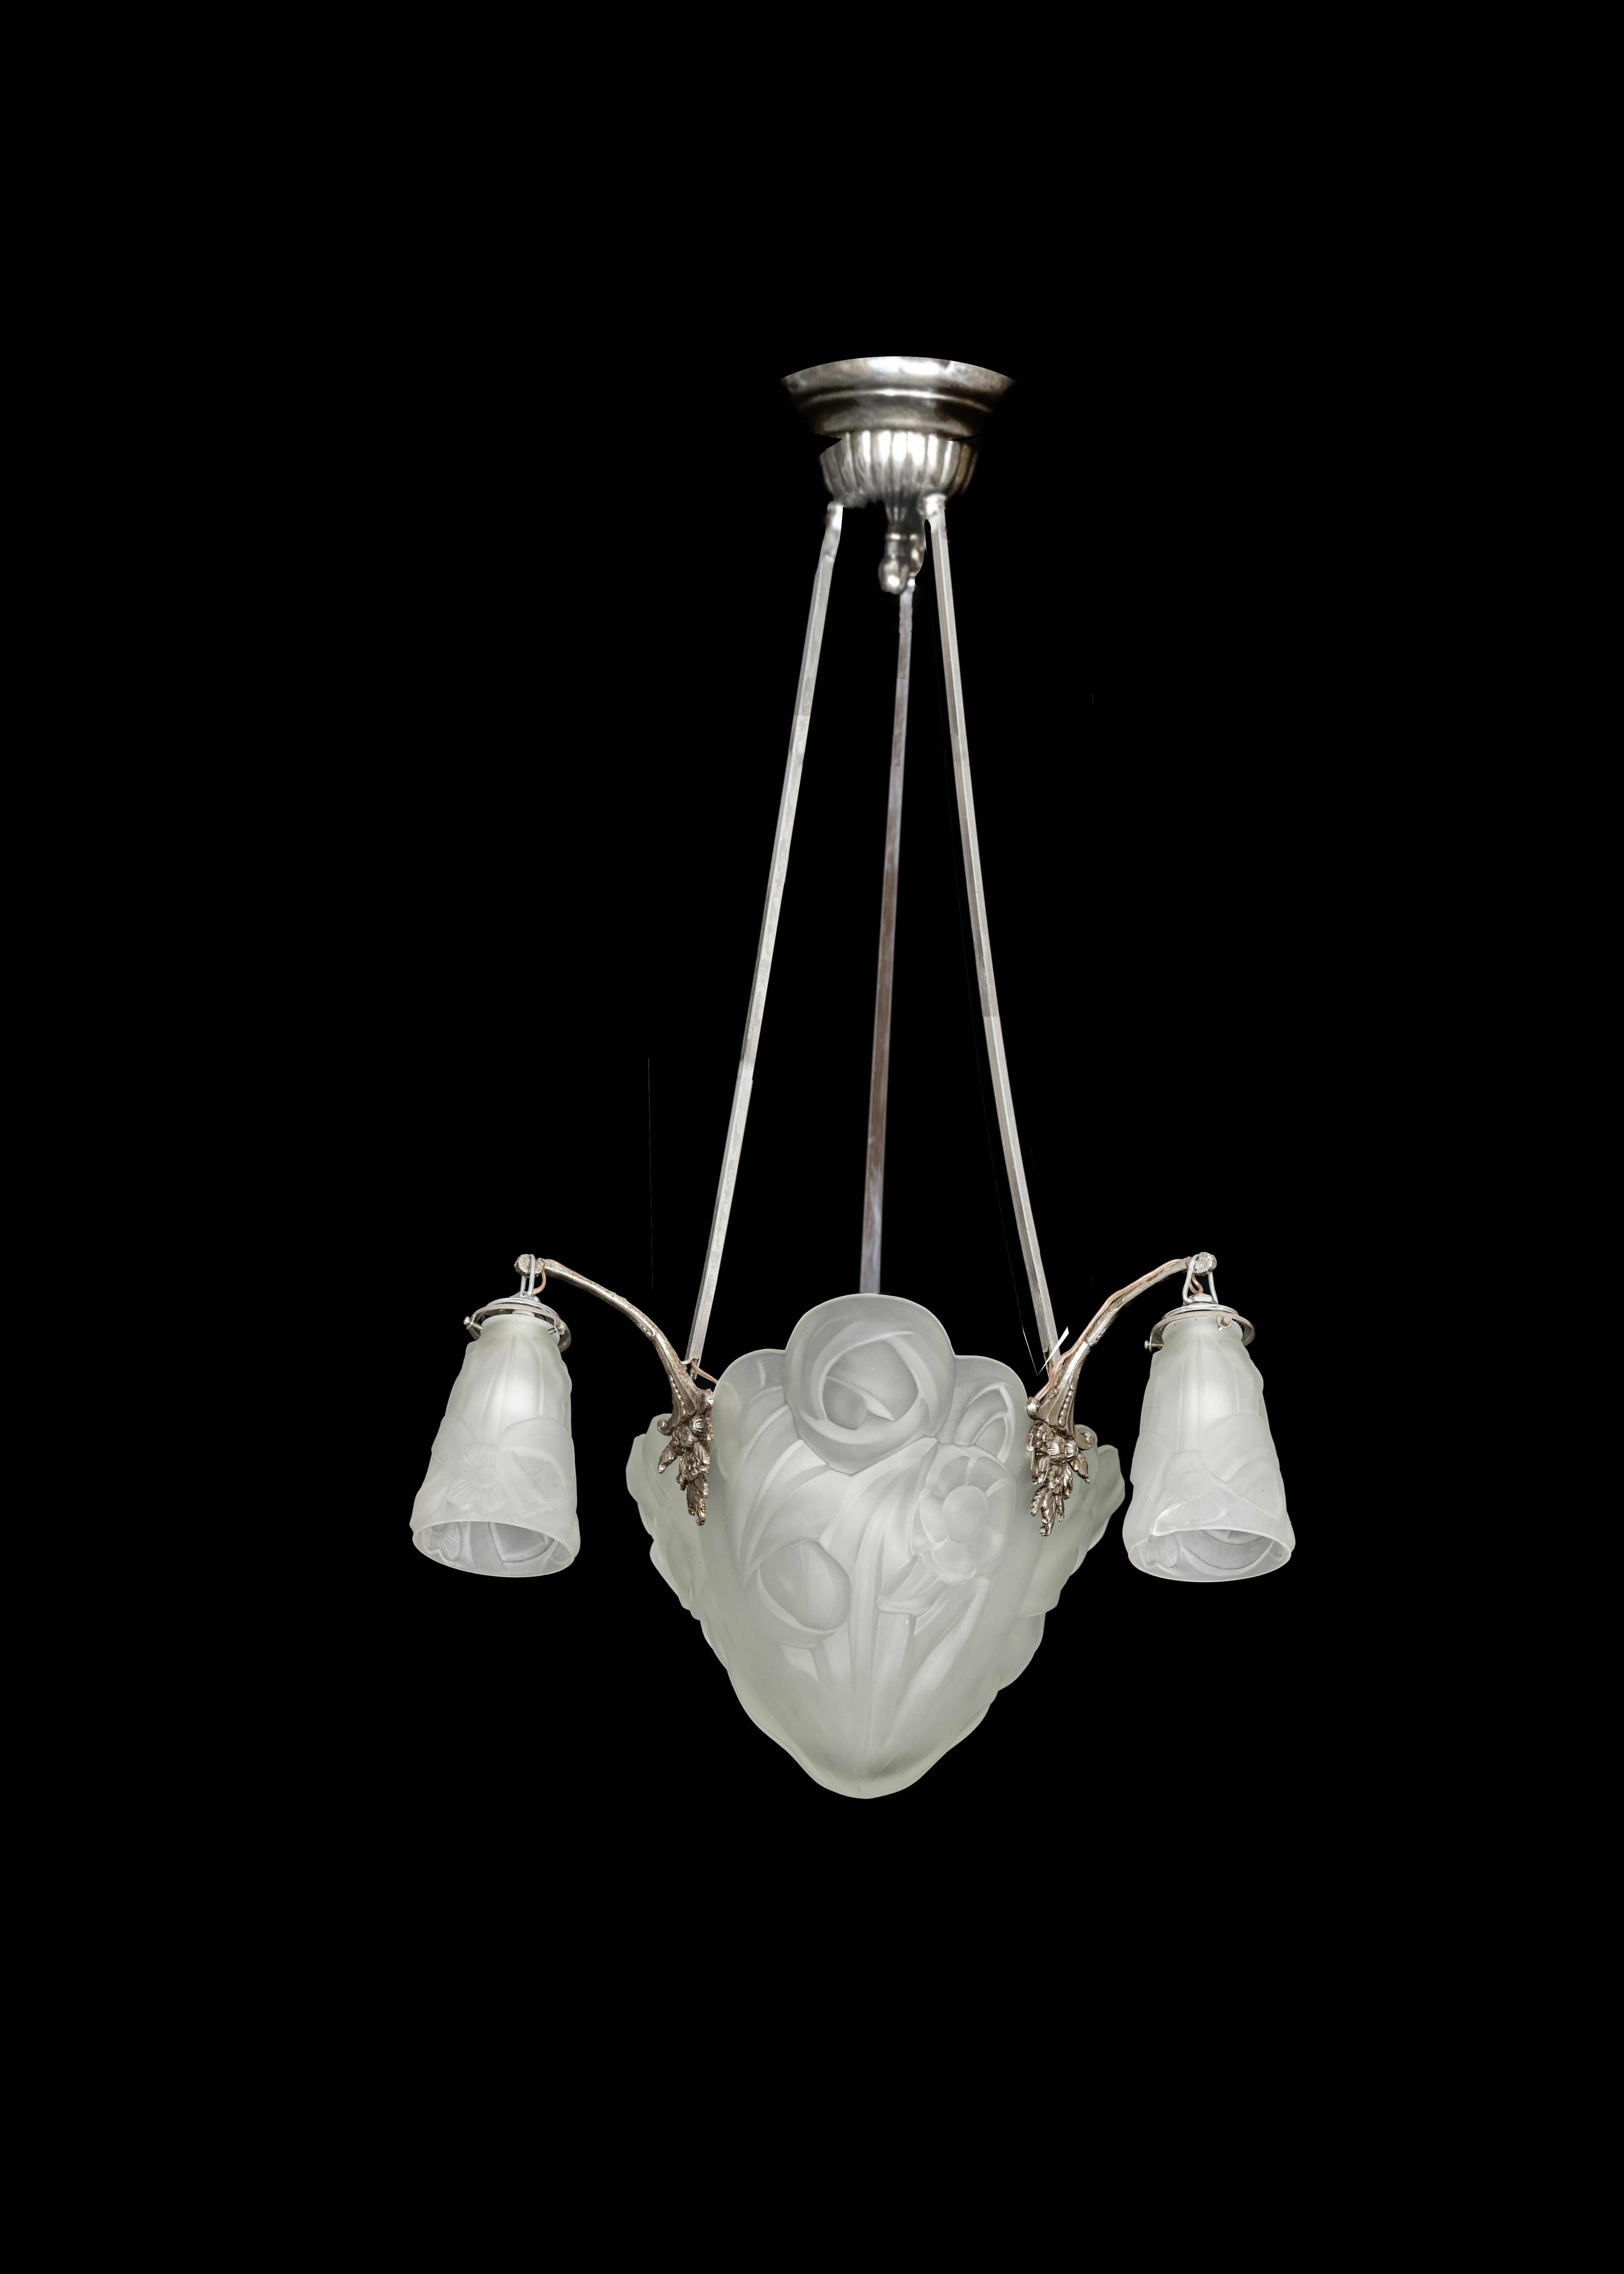 A Geometric glass etched curved Art Deco chandelier with three arms, shaded glass and nickel-plated bronze, fully rewired from  Henri Petitot  DeGue & A.
Petitot Designs and manufactured in the 1930s in collaboration with David Gueron Degue